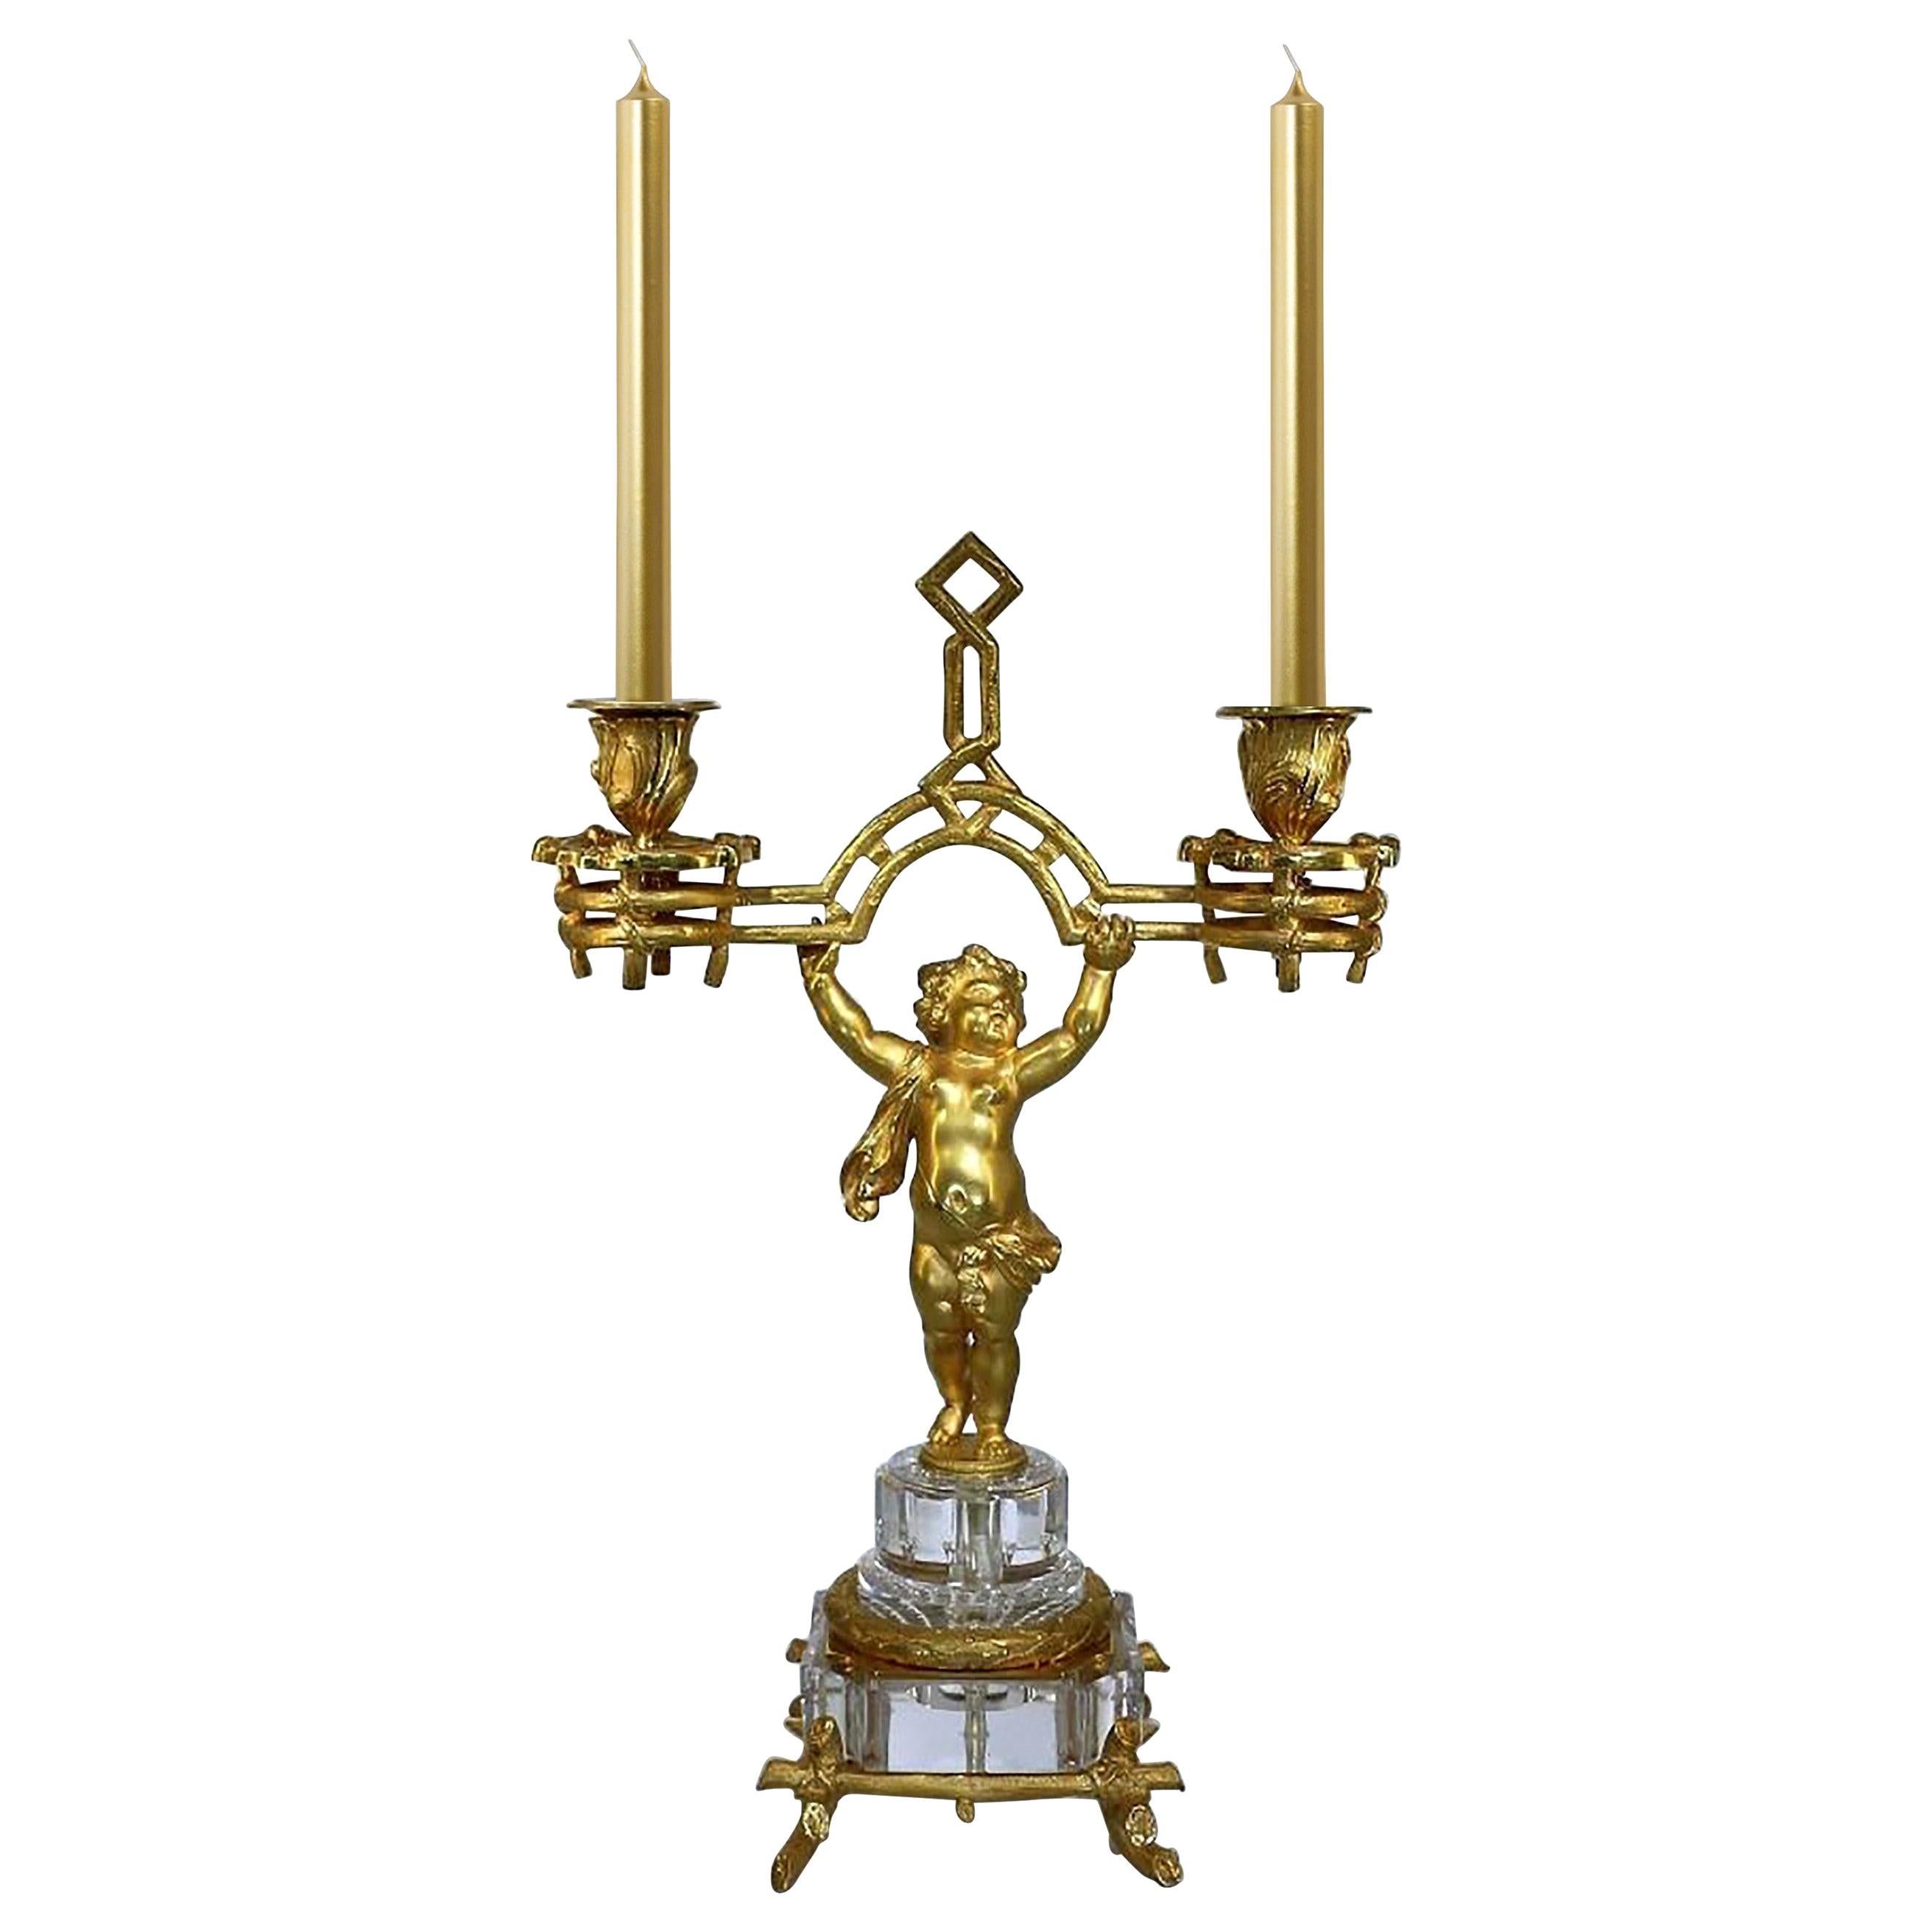 Stunning Baccarat, Fire-Gilded Bronze Putto Candlestick, Napoleon III